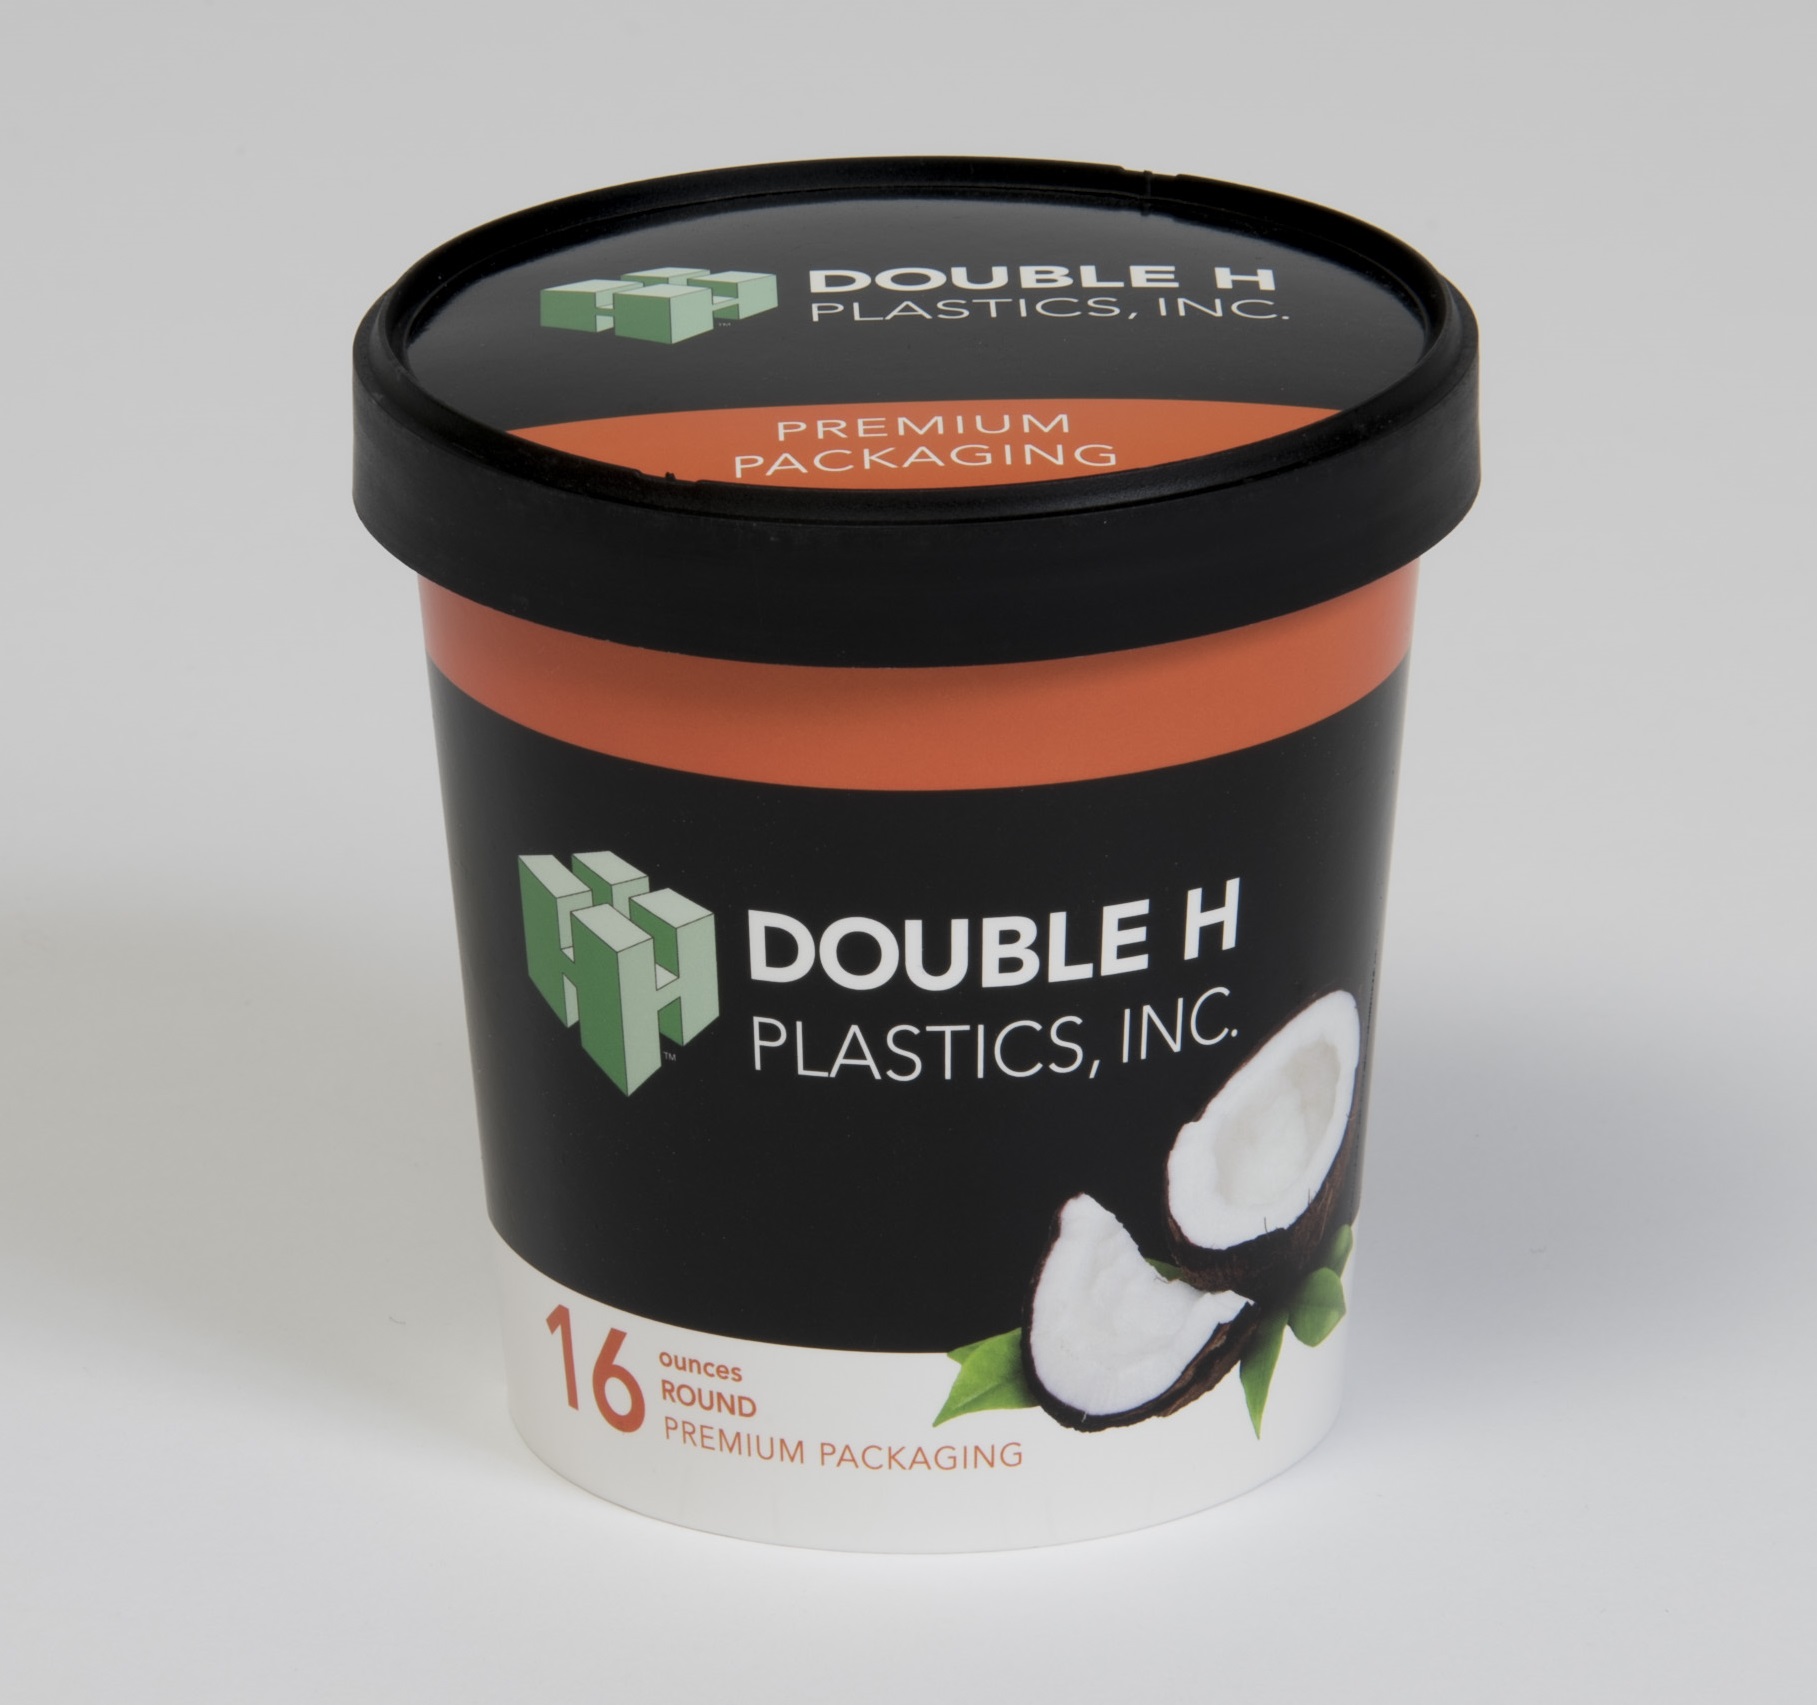 News & Events Archives - Page 2 of 2 - Double H Plastics